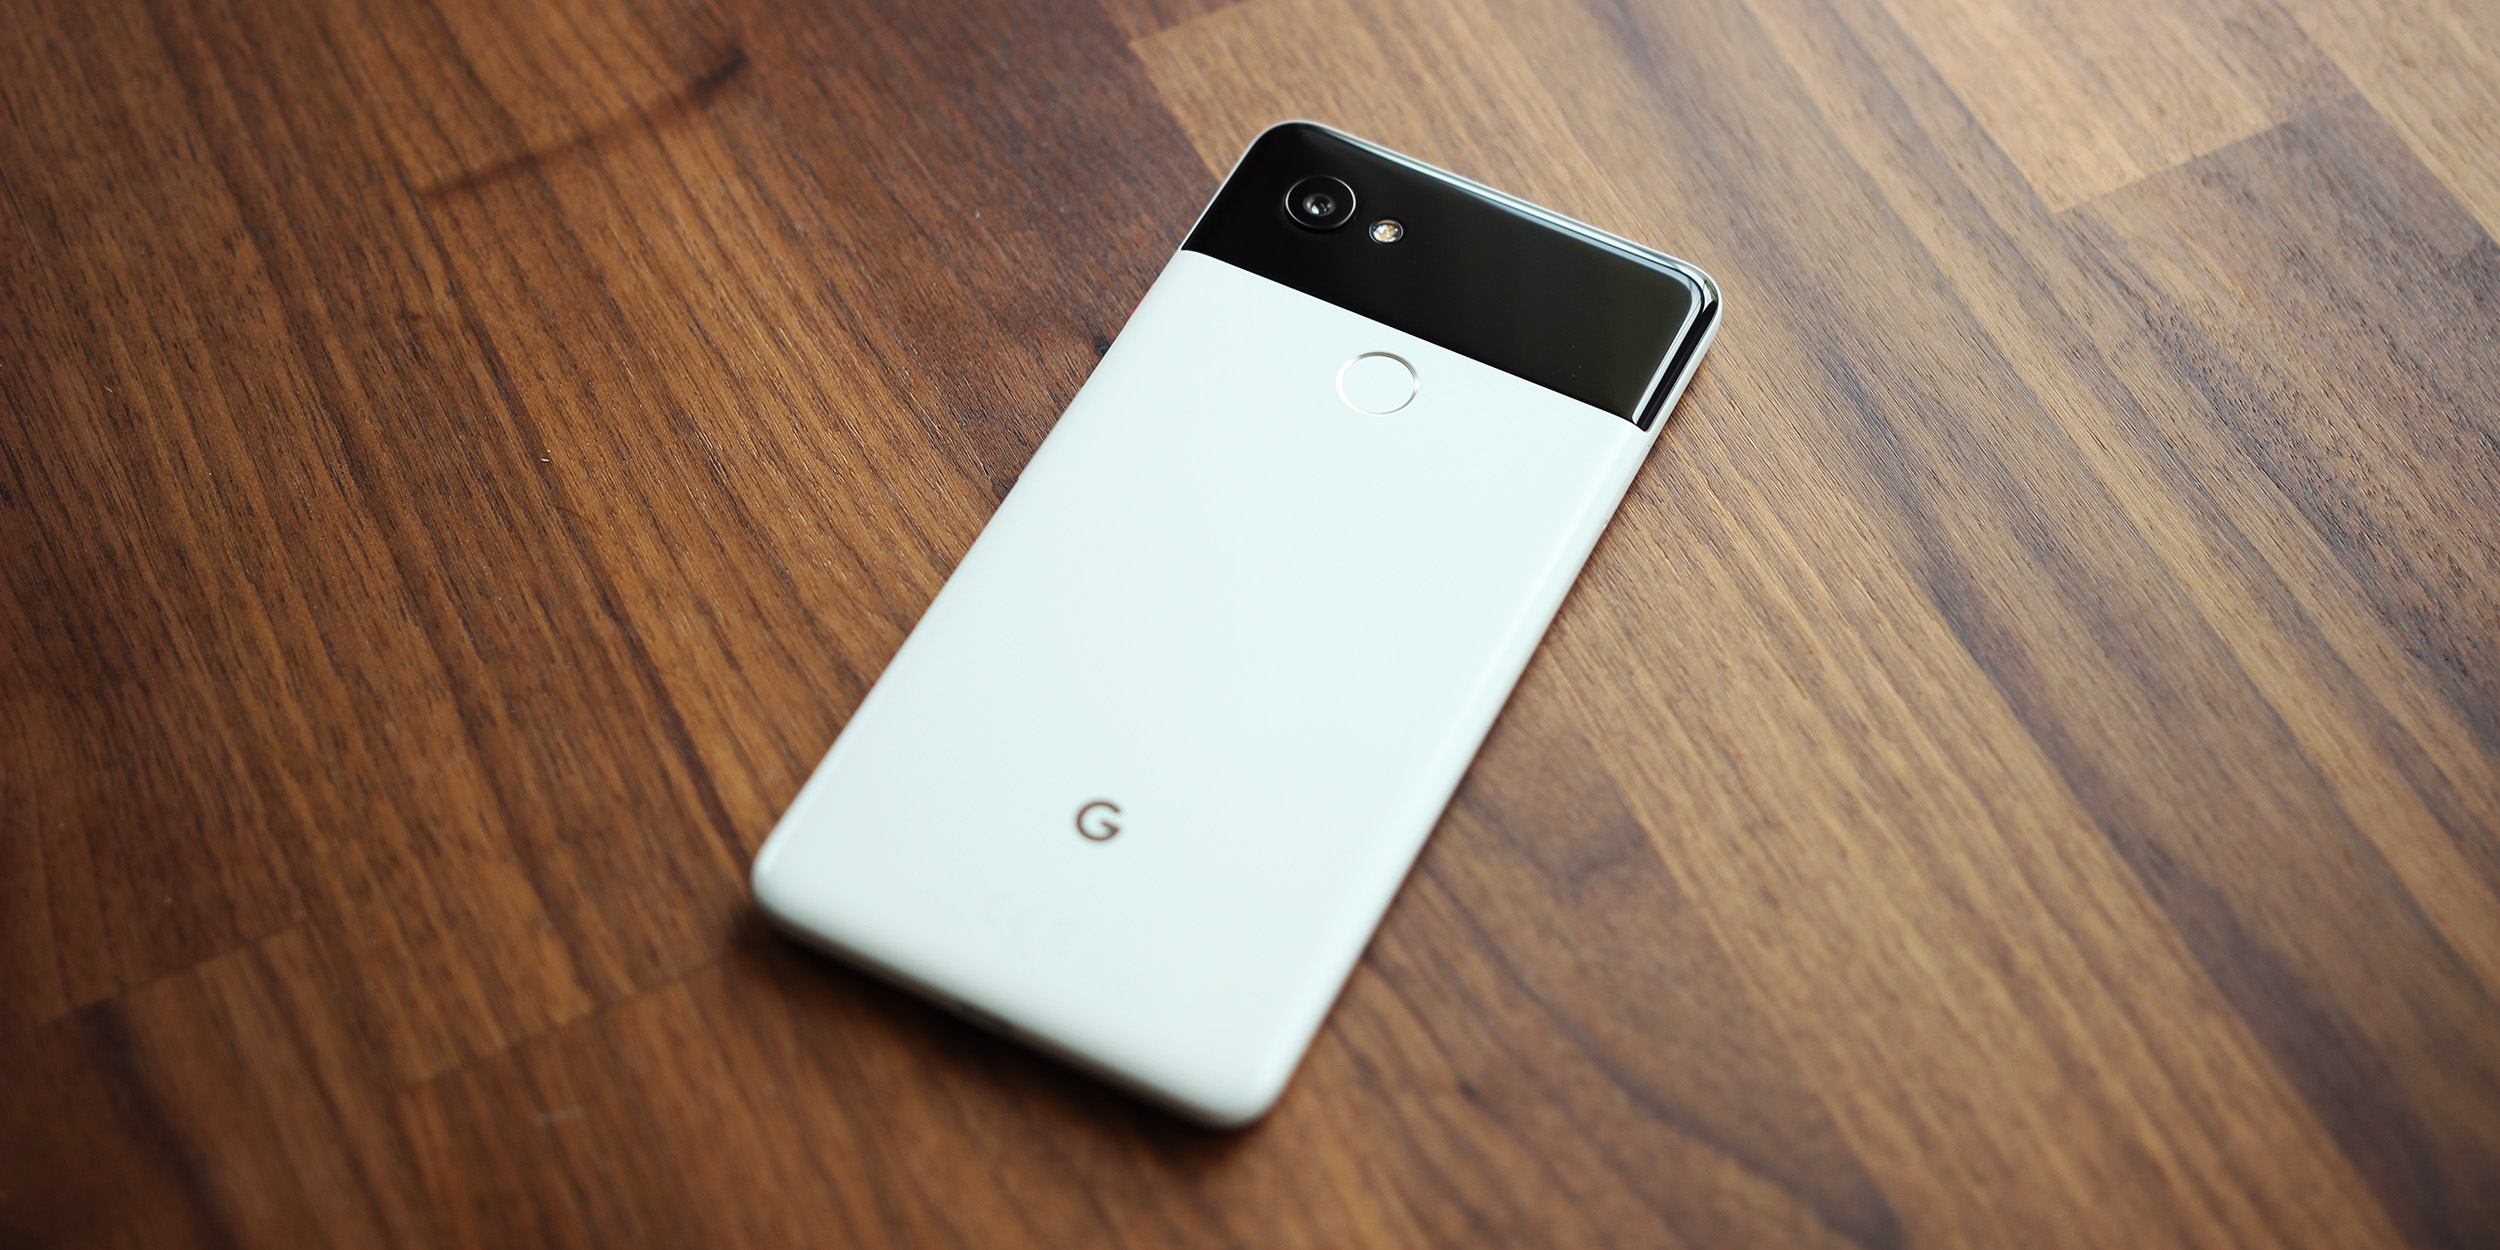 Review: Half a year later, the Google Pixel 2 XL has proven itself